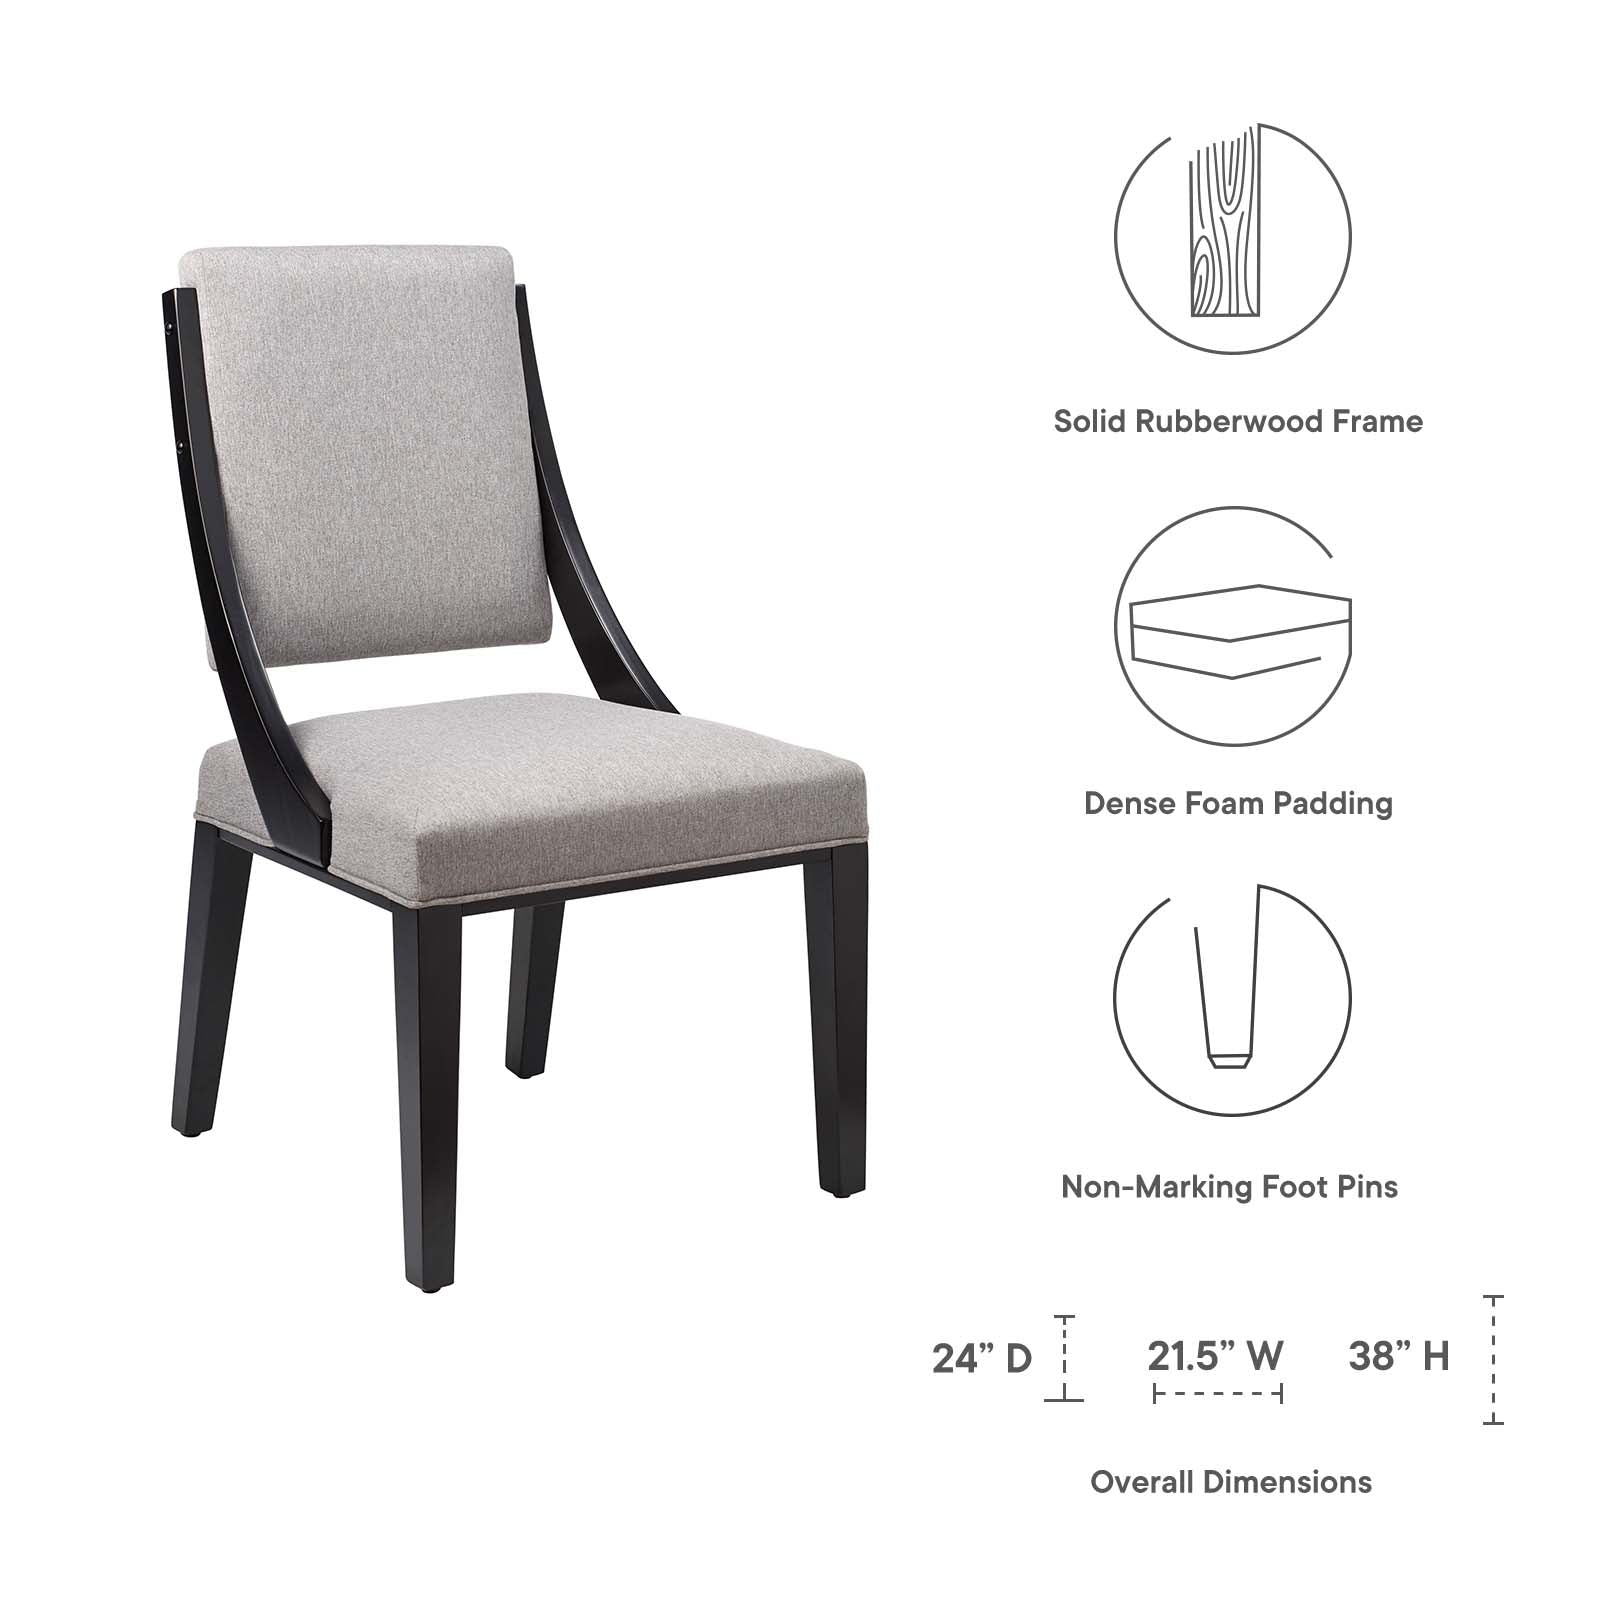 Cambridge Upholstered Fabric Dining Chairs - Set of 2 - East Shore Modern Home Furnishings